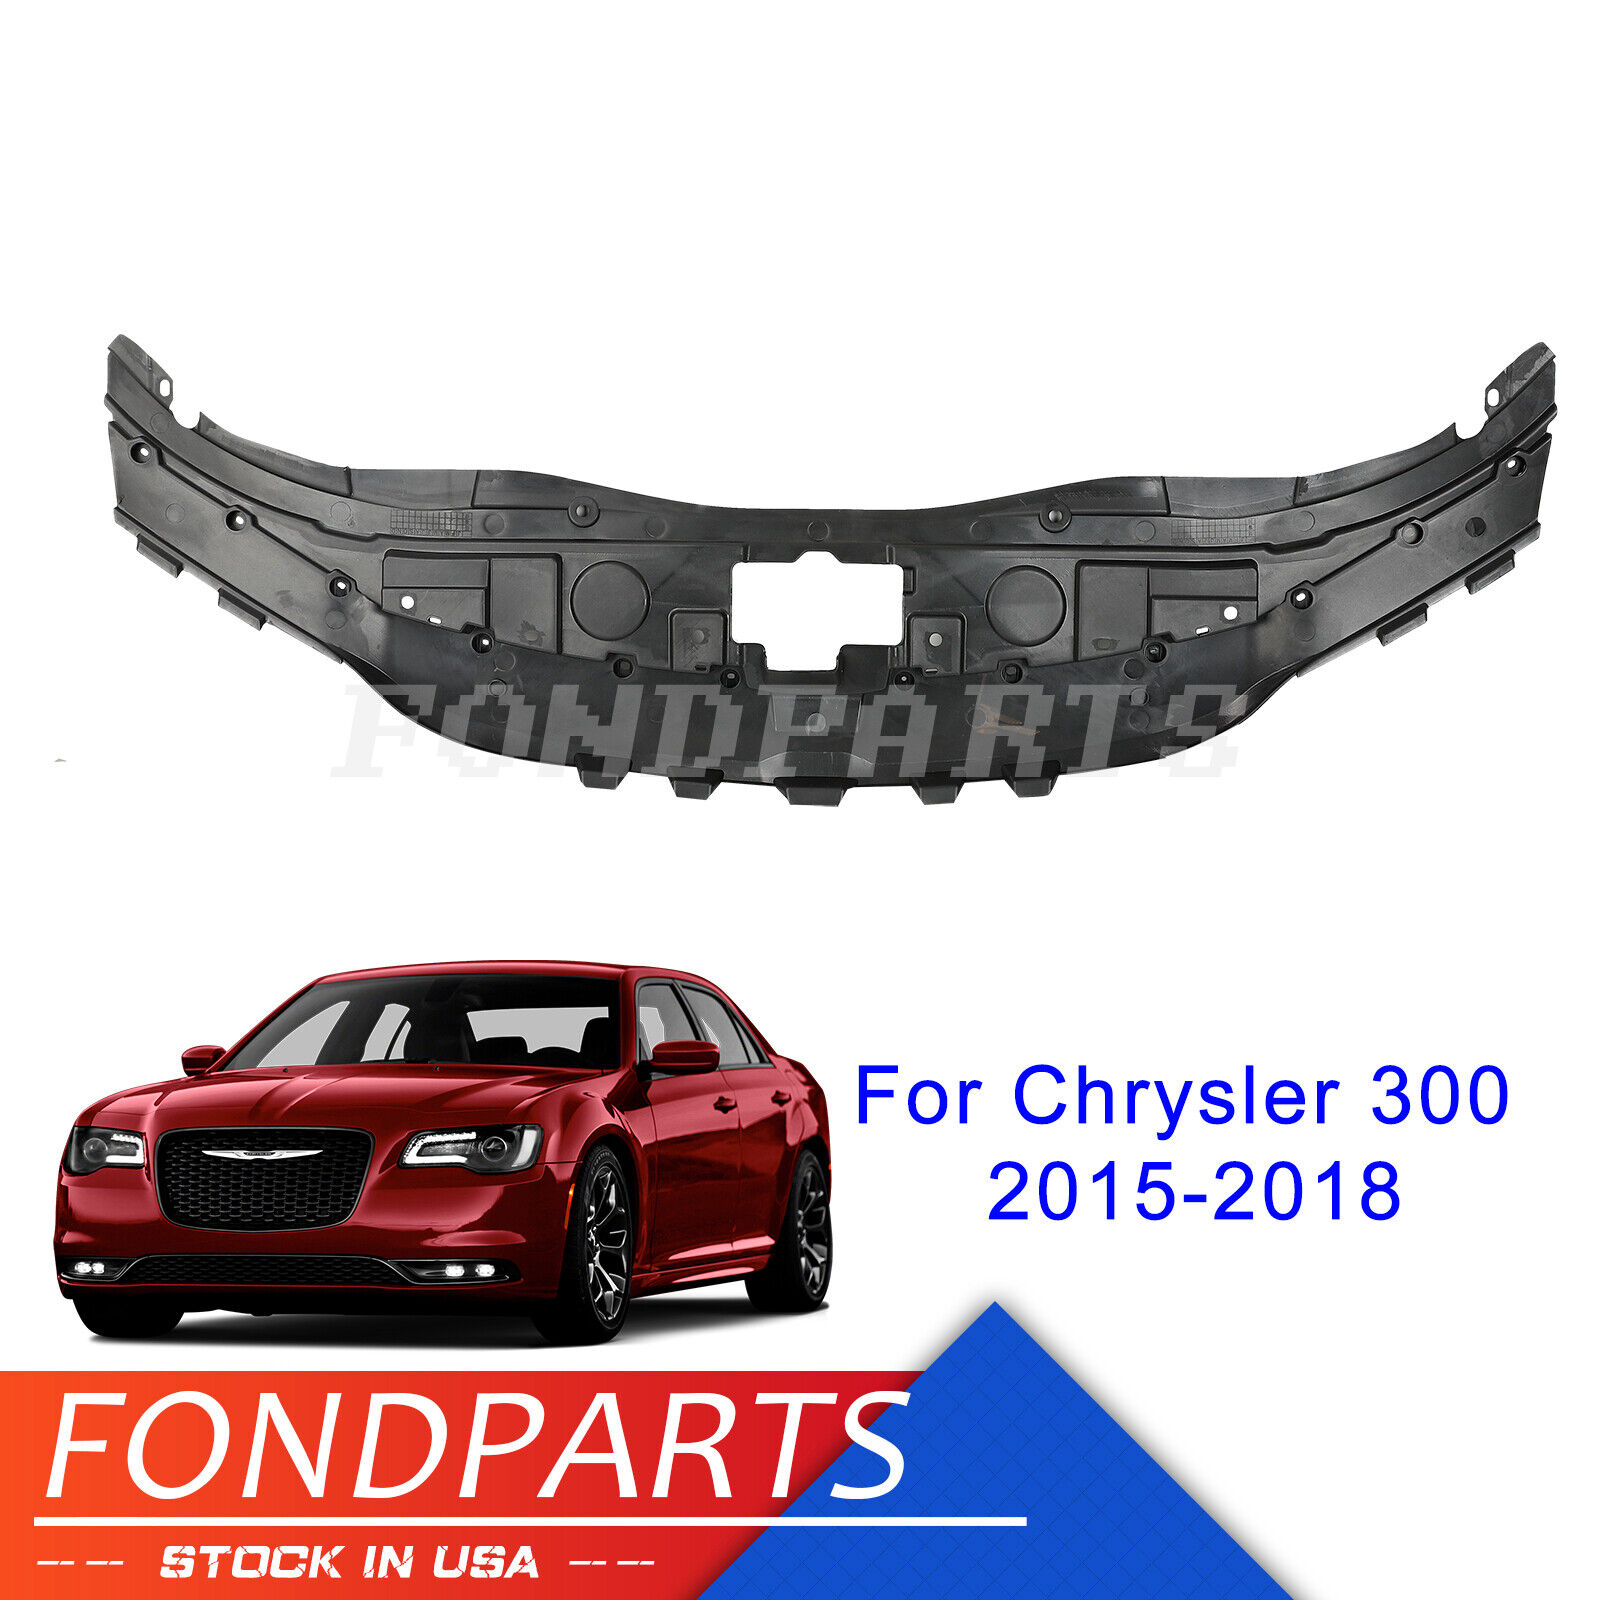 Radiator Core Support Upper Cover for 2015-2019 Chrysler 300 3.6L 5.7L CH1224103